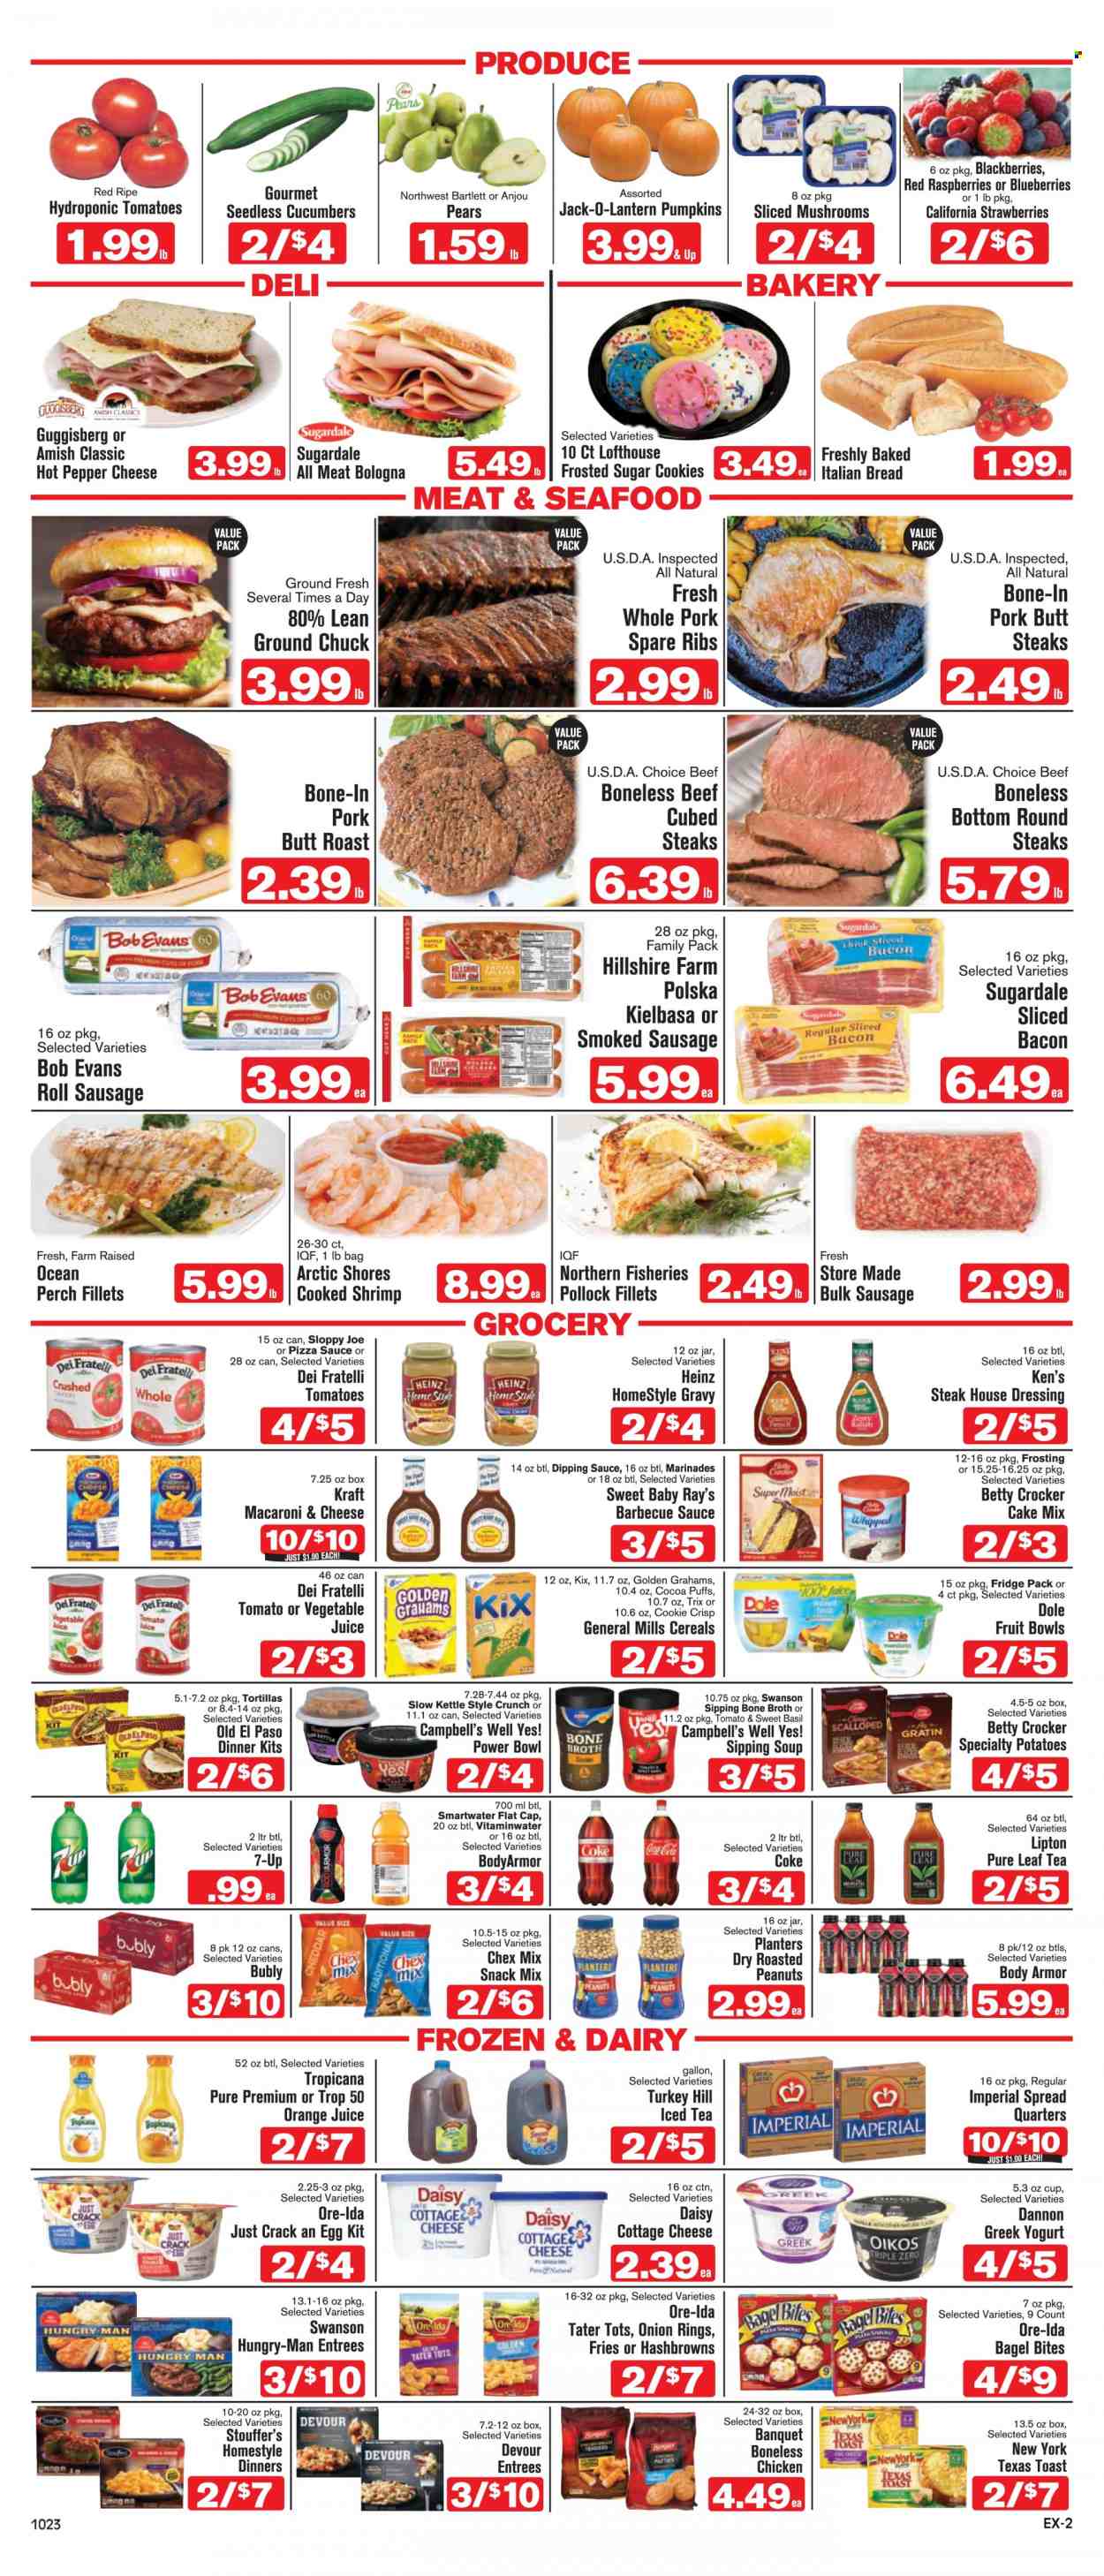 thumbnail - Shop ‘n Save Express Flyer - 10/23/2021 - 10/29/2021 - Sales products - bagels, bread, tortillas, Old El Paso, puffs, cake mix, cucumber, potatoes, pumpkin, Dole, blackberries, blueberries, strawberries, pears, ground chuck, steak, Bob Evans, pork meat, pork ribs, pork spare ribs, pollock, perch, seafood, shrimps, Arctic Shores, Campbell's, macaroni & cheese, onion rings, soup, dinner kit, Kraft®, Sugardale, bacon, Hillshire Farm, bulk sausage, sausage, smoked sausage, kielbasa, cottage cheese, greek yoghurt, yoghurt, Oikos, Dannon, Devour, Stouffer's, hash browns, potato fries, Ore-Ida, tater tots, cookies, snack, Chex Mix, frosting, broth, Heinz, cereals, Trix, esponja, BBQ sauce, homestyle gravy, dressing, roasted peanuts, peanuts, Planters, Coca-Cola, orange juice, juice, Body Armor, Lipton, ice tea, 7UP, vegetable juice, Smartwater, Pure Leaf, beef bone. Page 2.